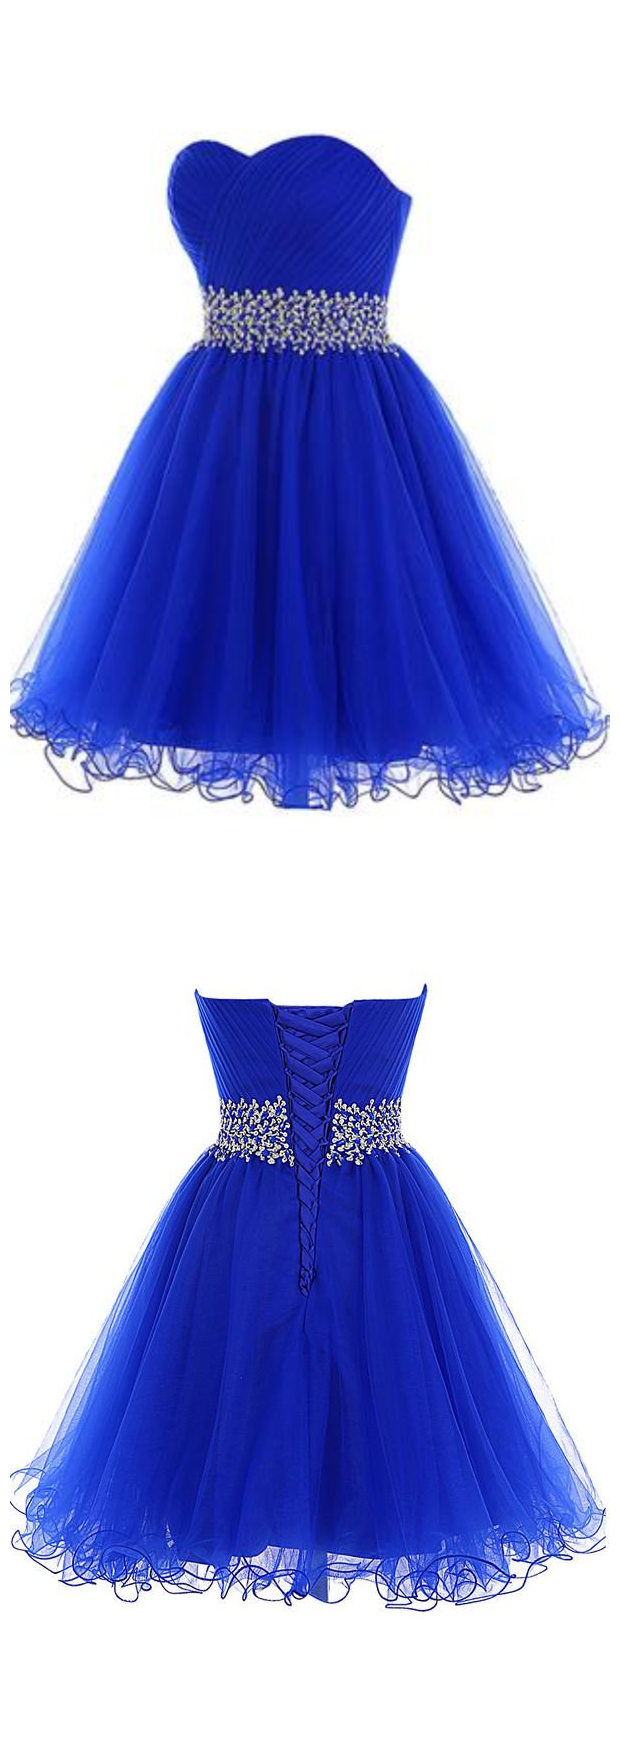 Royal Blue Beaded Tulle Prom Dresses Homecoming Dress